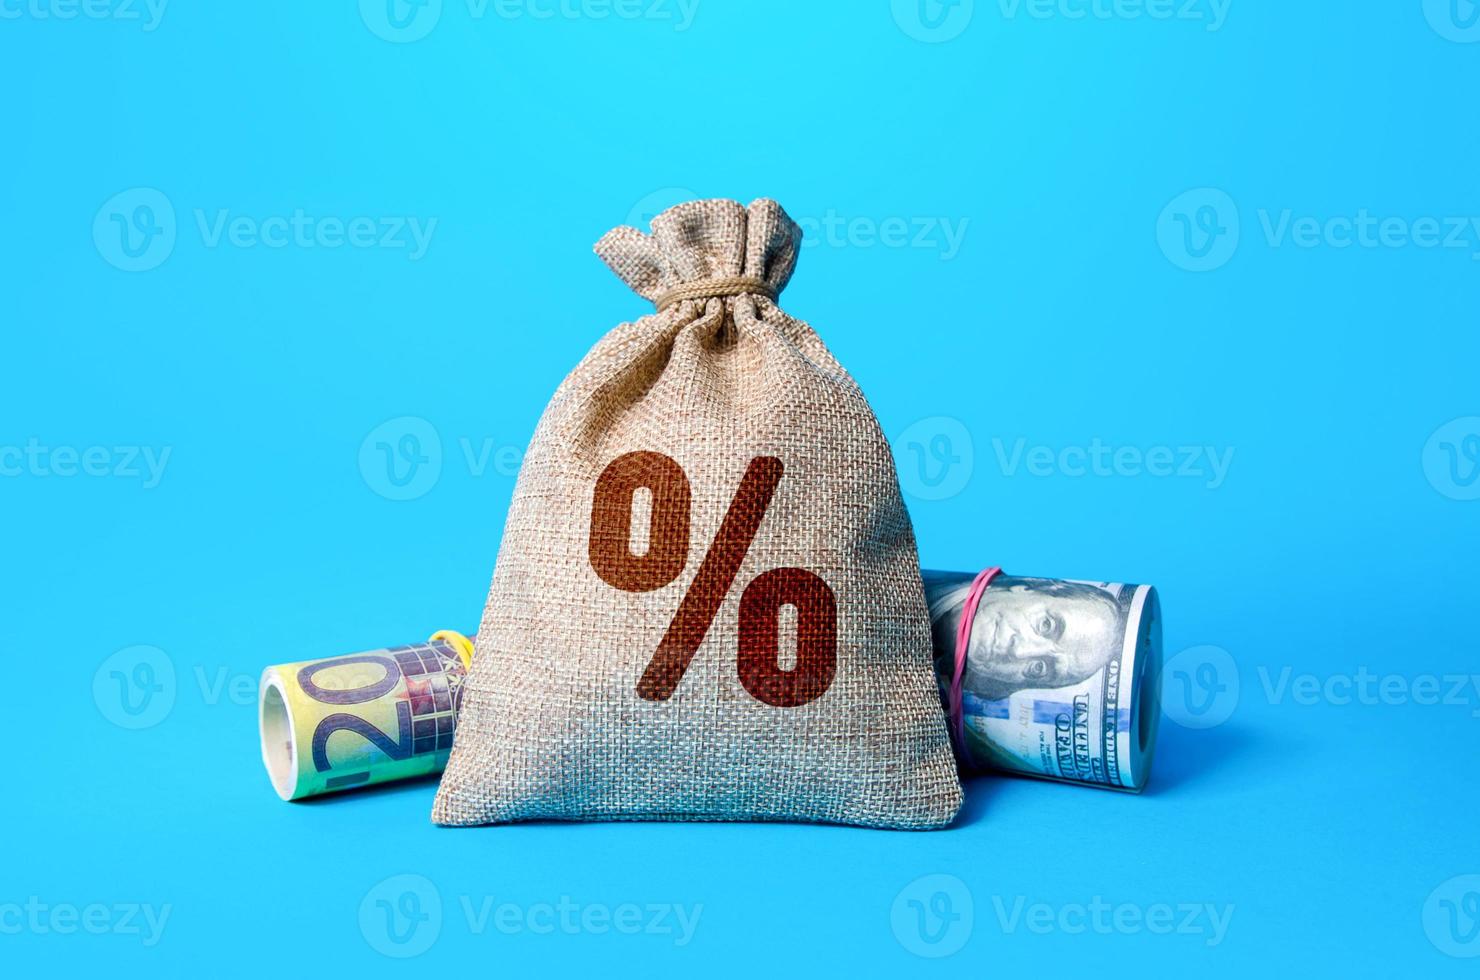 Money and a bag of interest. Official interest rates. Inflationary risks and regulation of the financial system. Deposit or loan. Key Policy Rate. Profitable investment of savings. Dividend photo